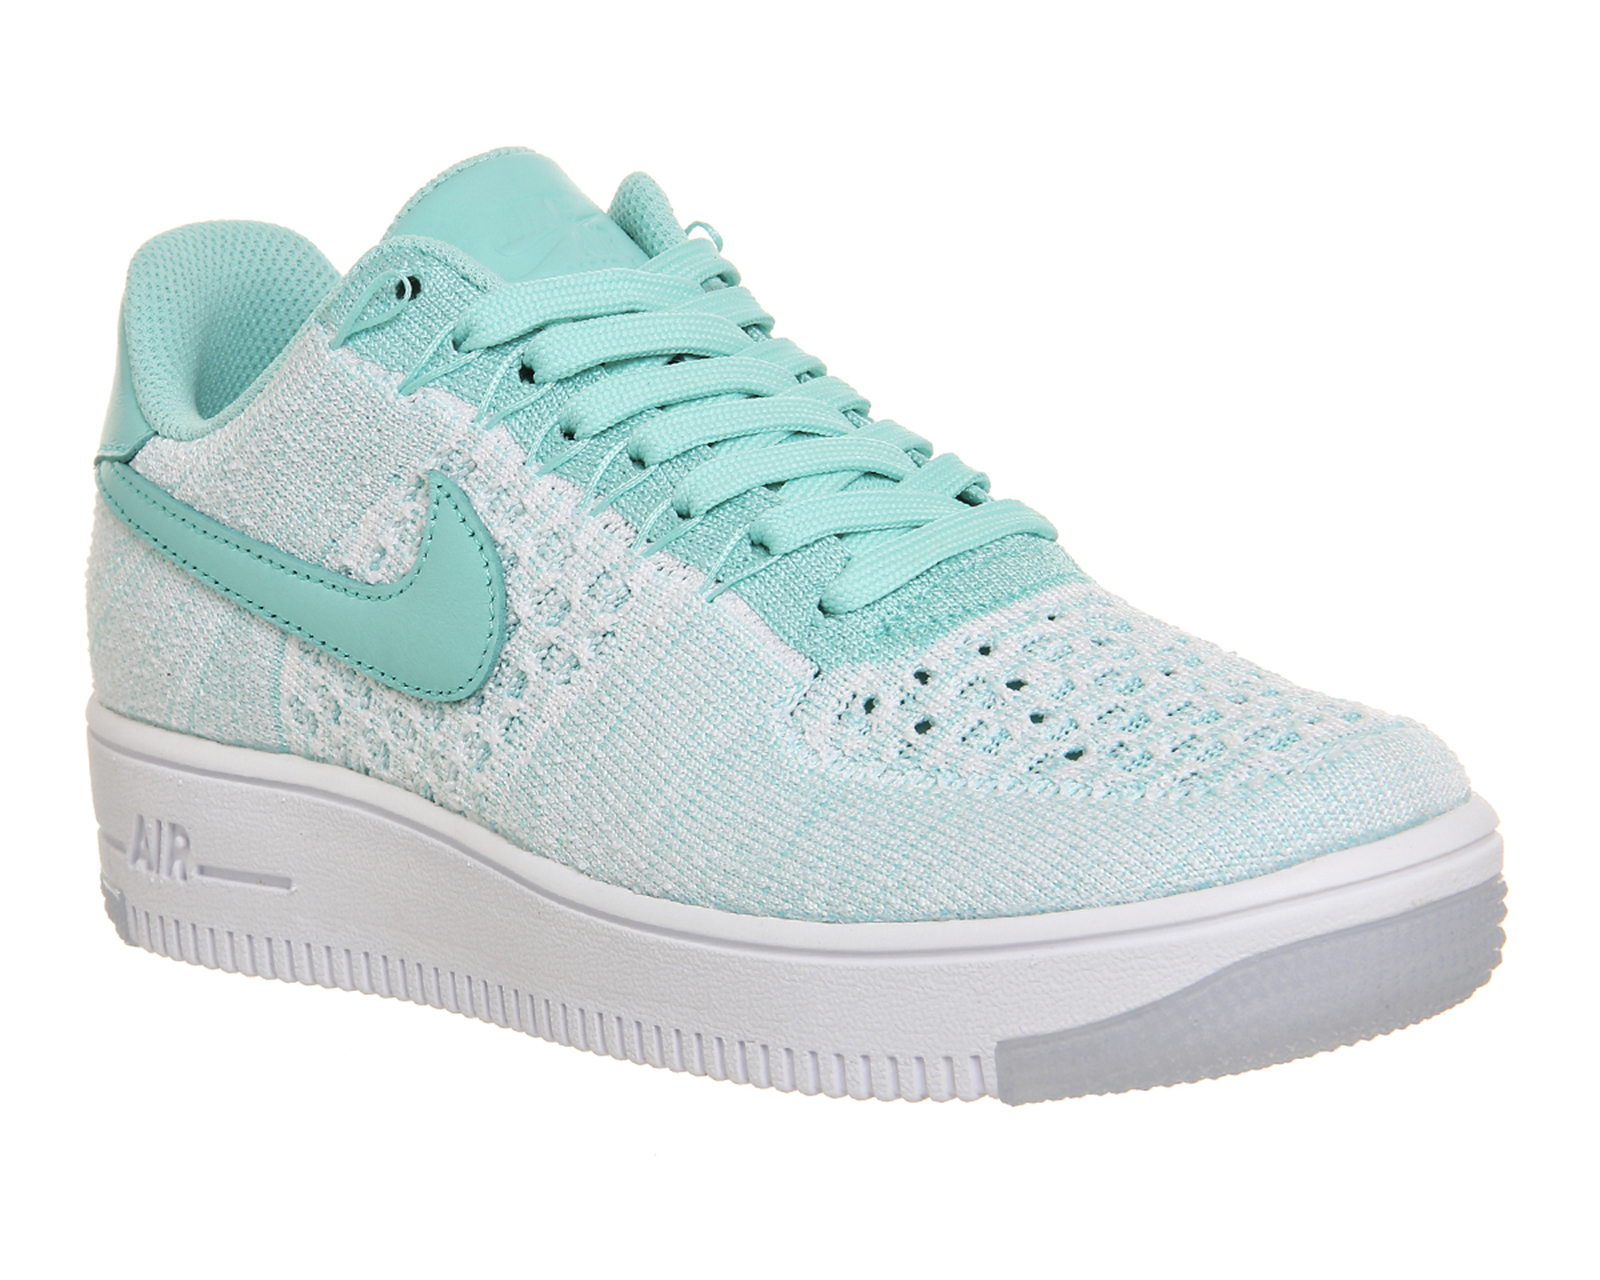 NikeAir Force 1 Low Flyknit Hyper Turquoise